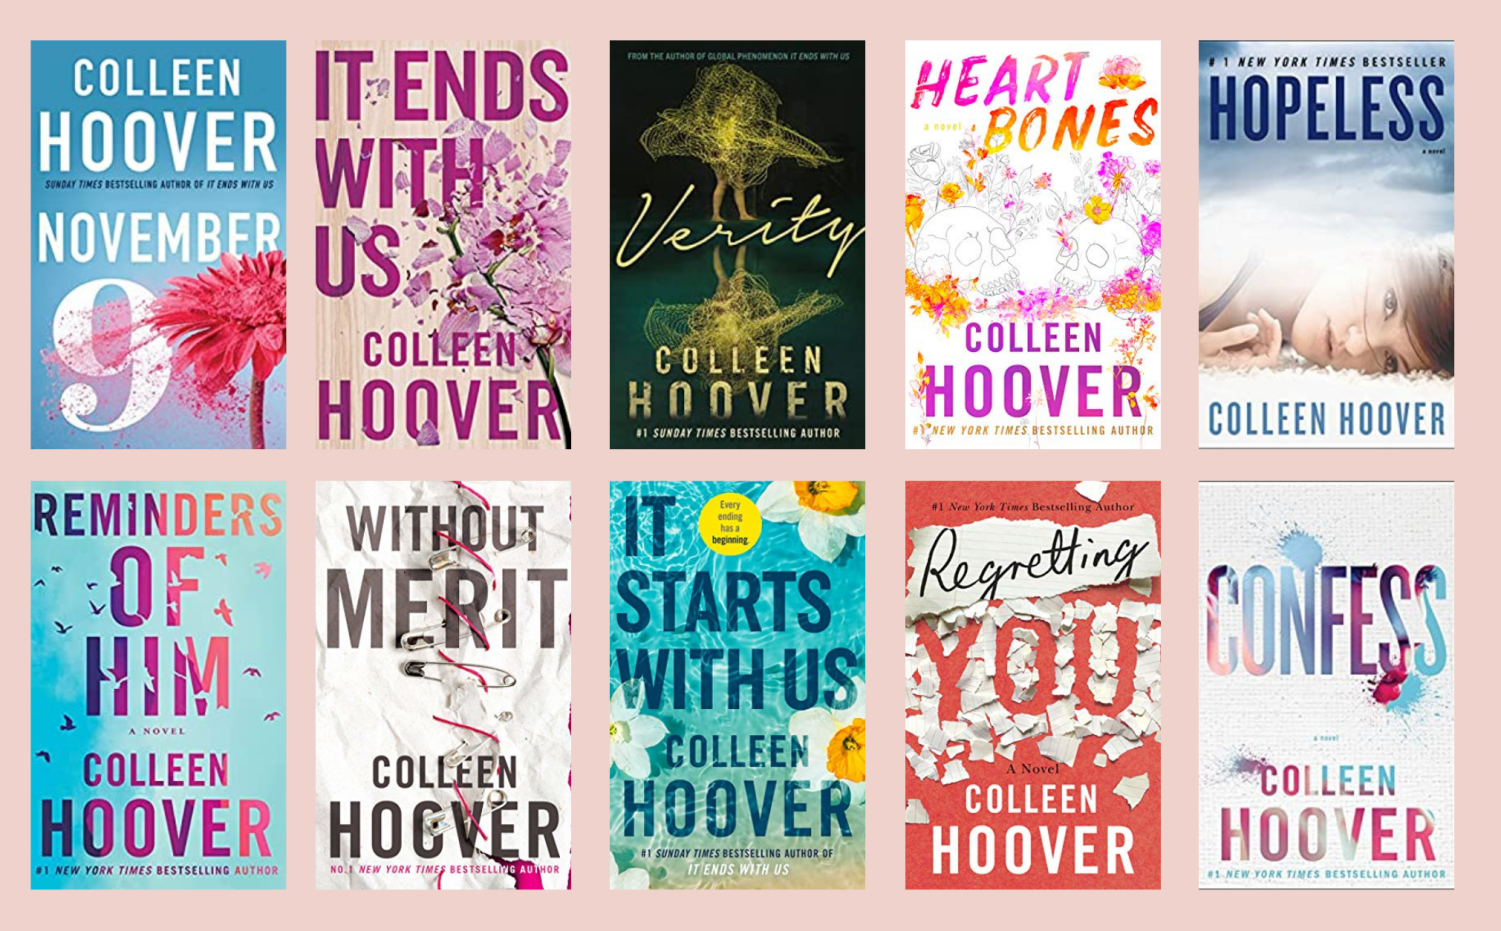 The Gator's Eye Colleen Hoover Does She Deserve The Hype?